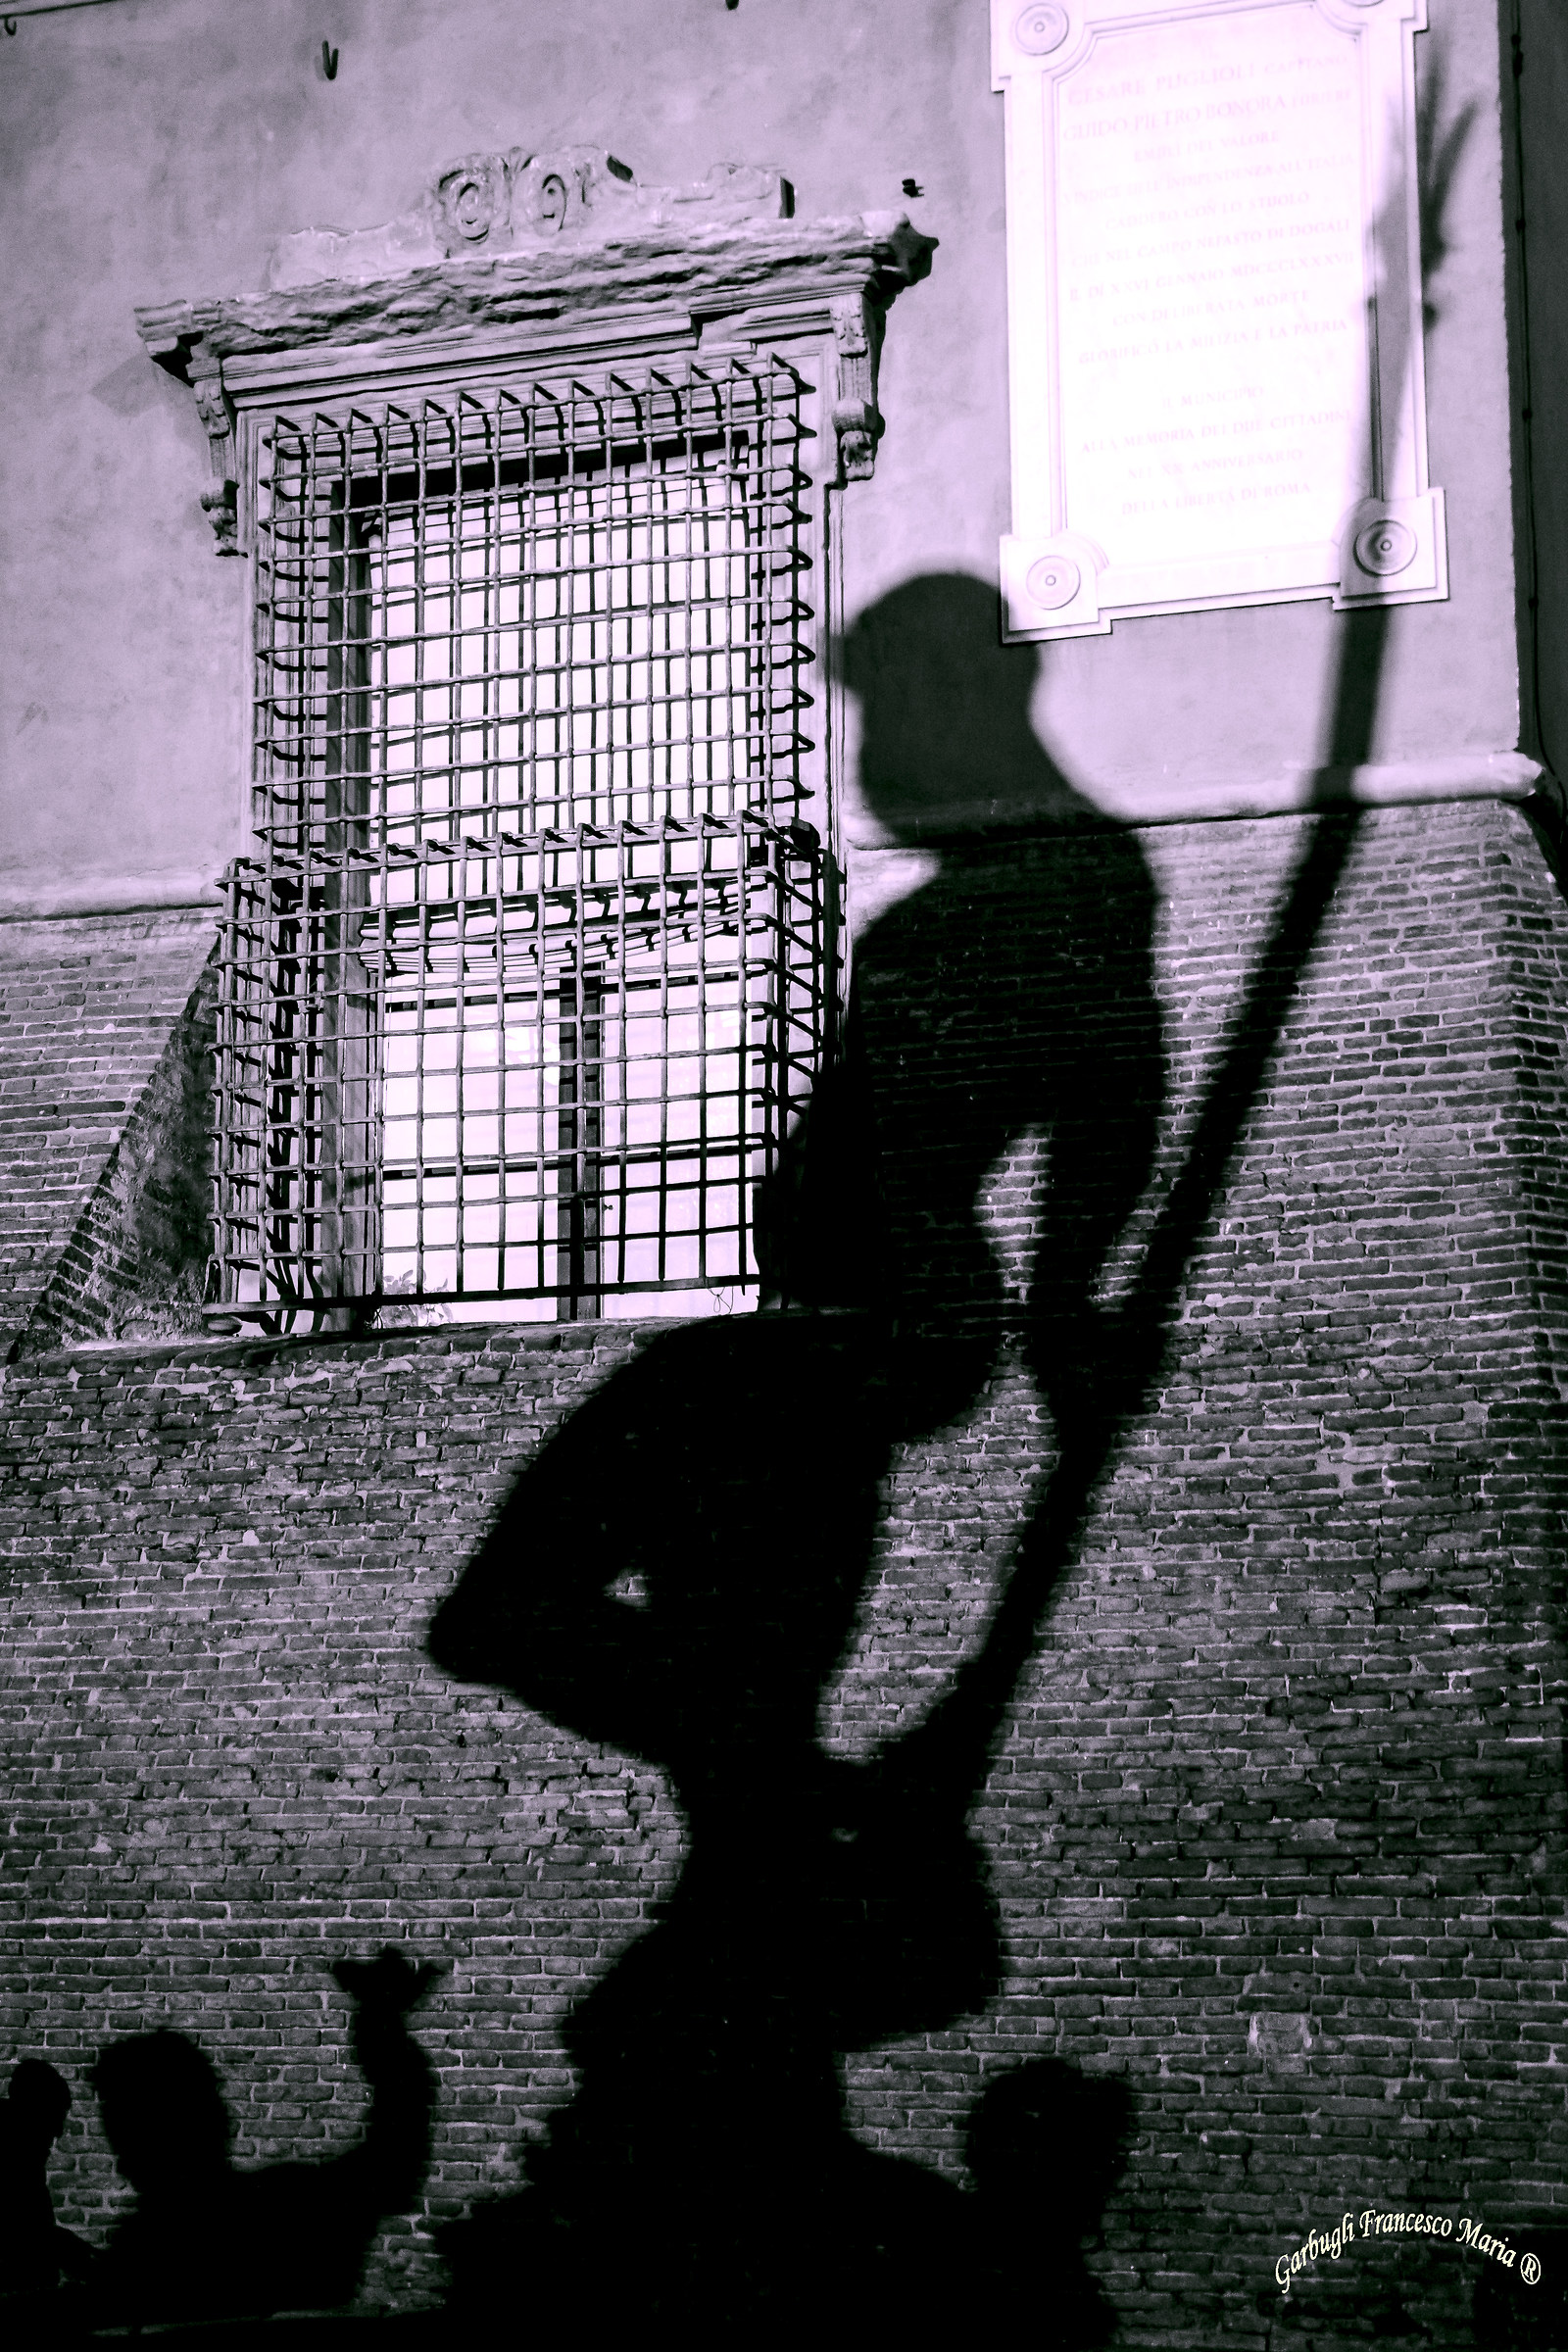 The shadow of the art around us...